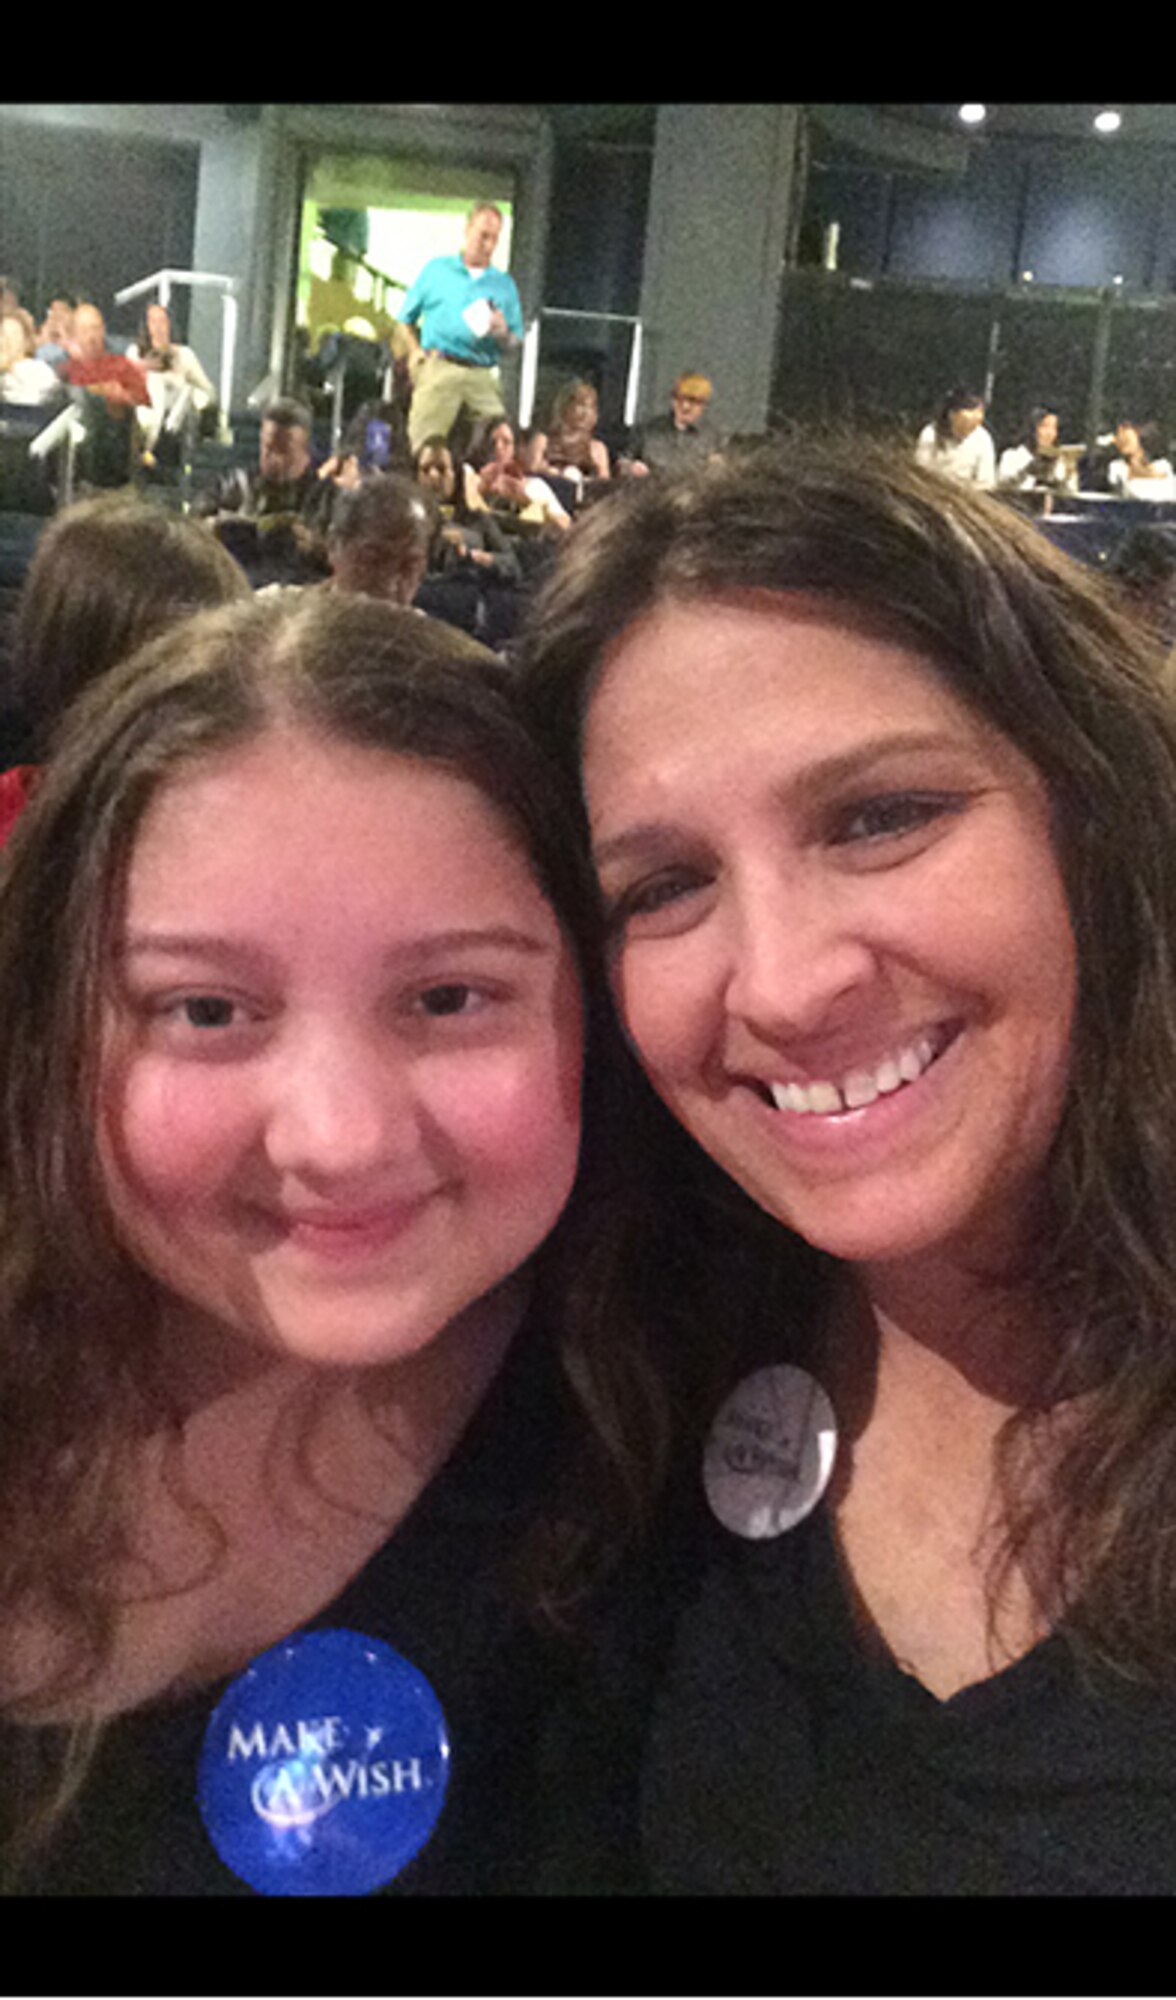 Caitlin and Renee Butcher pose for a picture Aug. 23, 2016, during their trip to New York City. Caitlin has had an undiagnosed illness since December 2015 and was accepted into the Make A Wish Foundation. Her and her family received a trip to New York City to see Wicked on Broadway, Statue of Liberty, Central Park, Empire State Building and the American Museum of Natural History. (Courtesy photo)